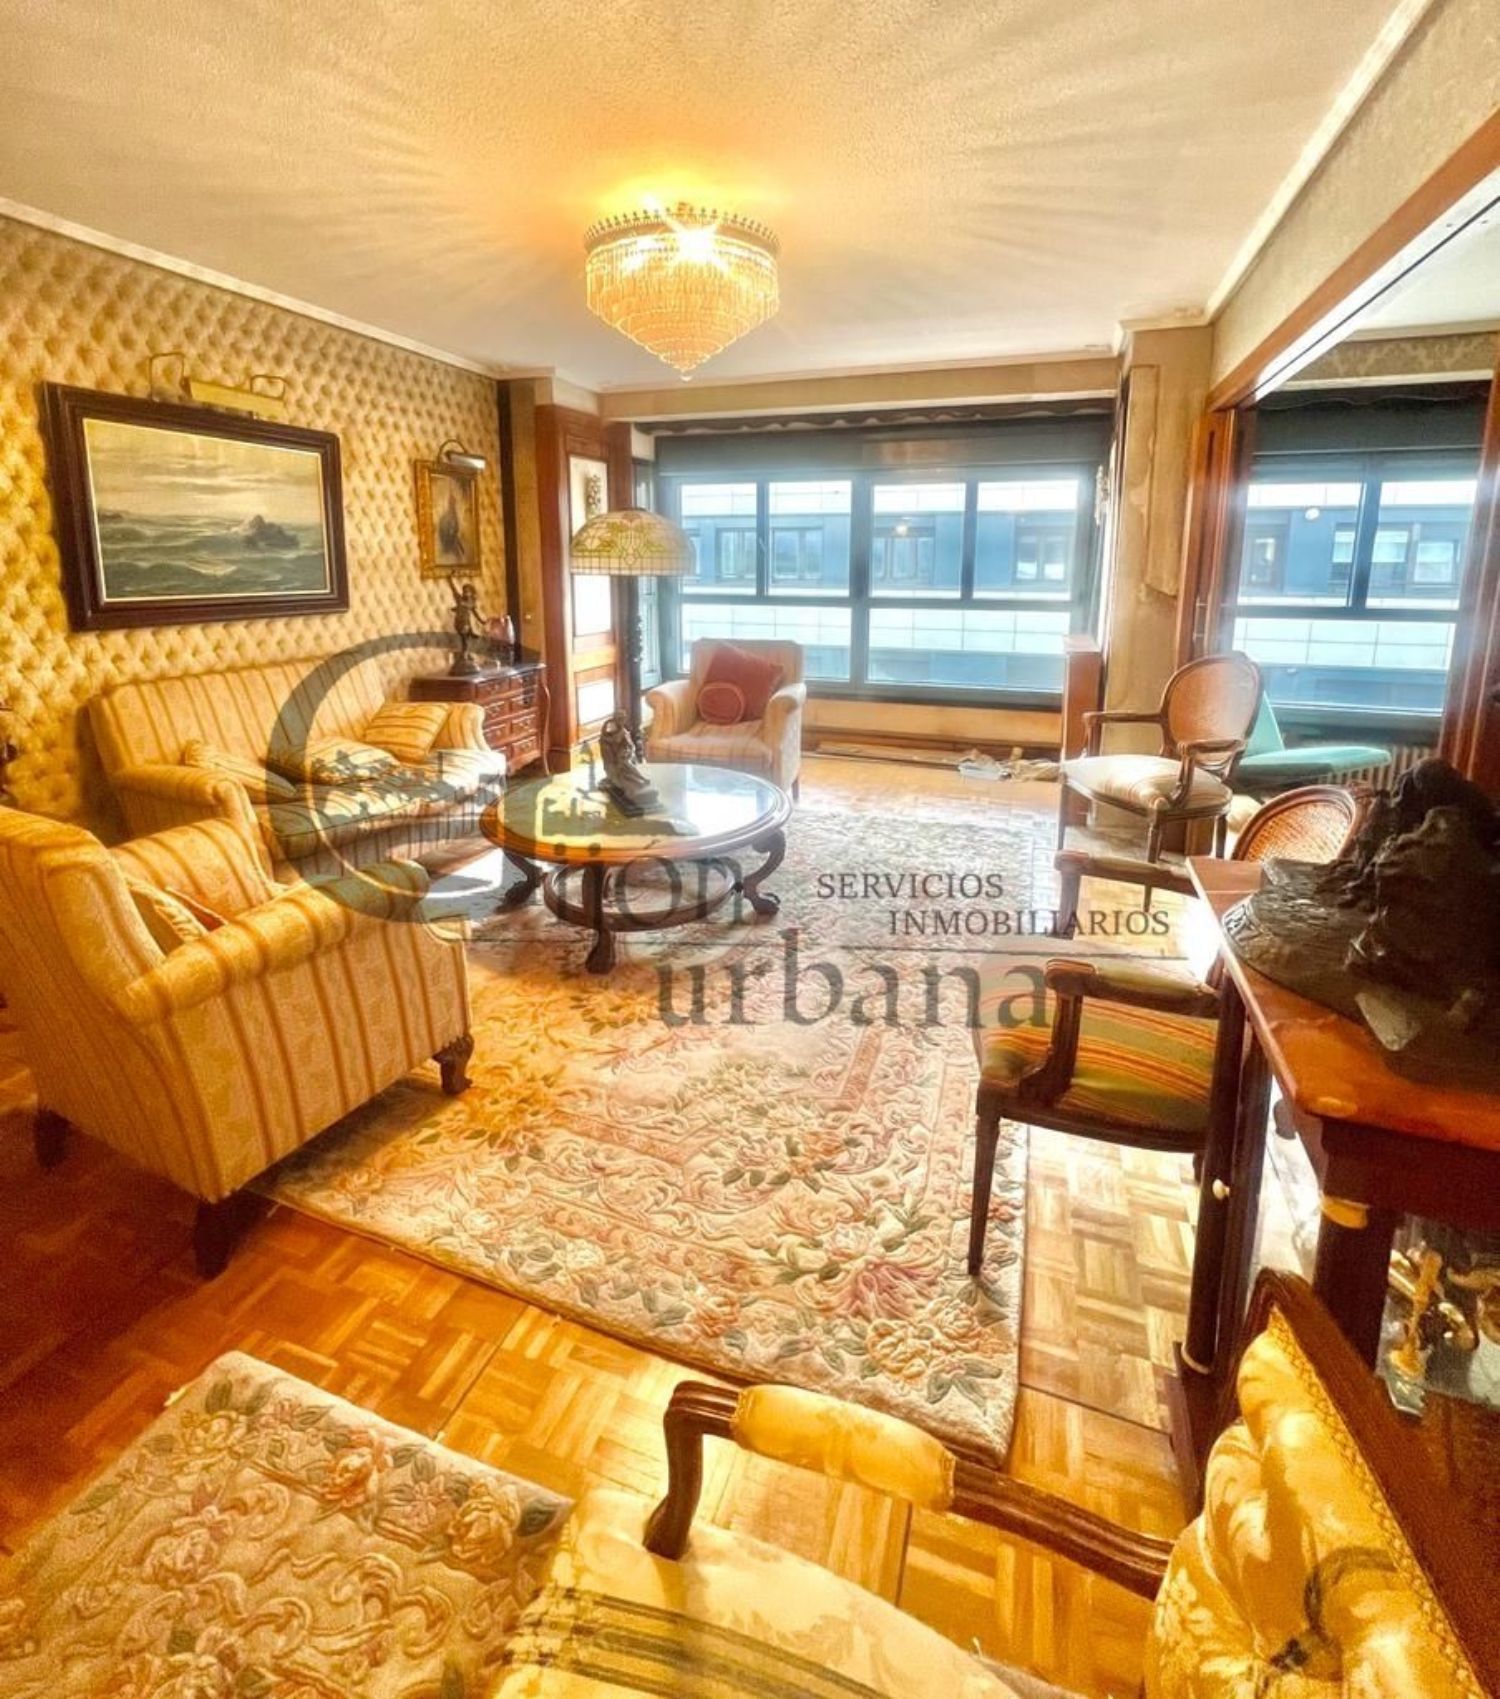 Apartment for sale on the seafront on Calle Marqués de Urquijo, in Gijón